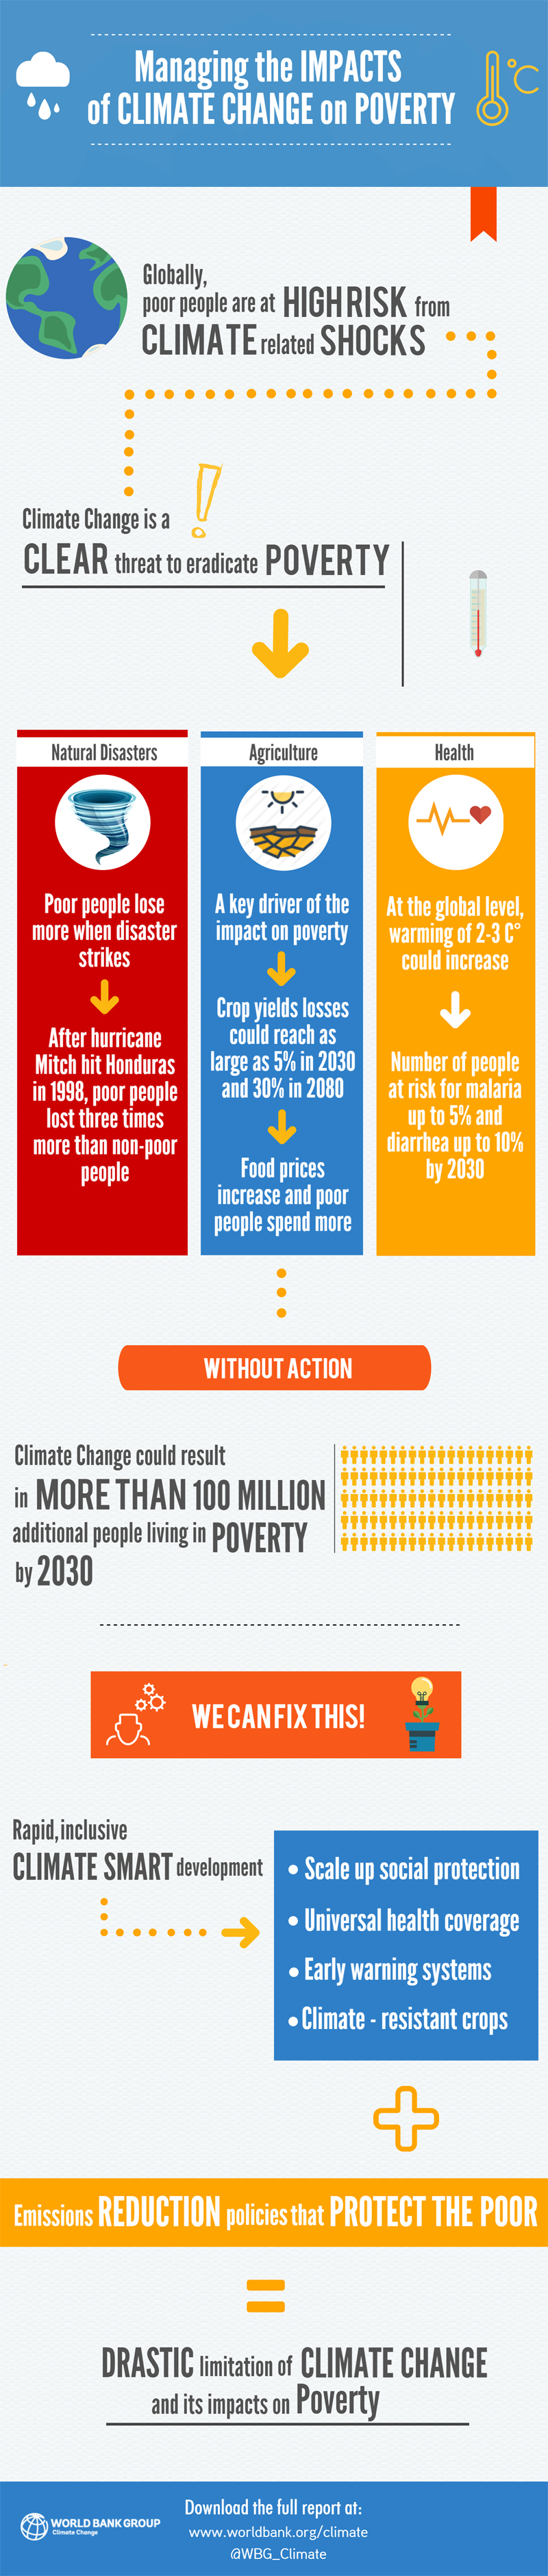 Infogrphics: Managing the impacts of climate change on poverty